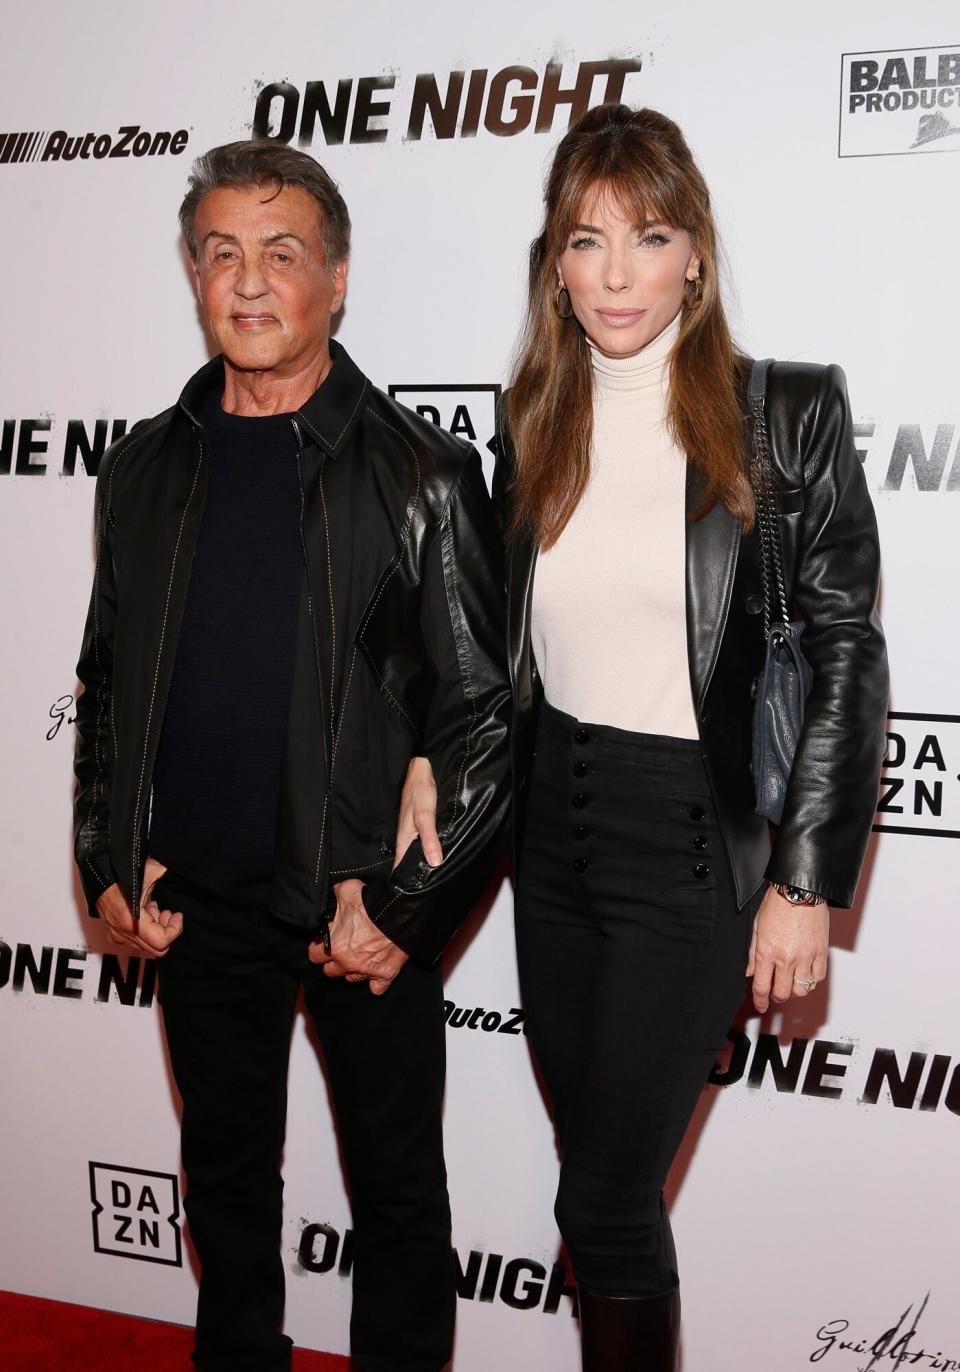 Sylvester Stallone, Jennifer Flavin. Executive Producer Sylvester Stallone, left, and wife and entrepreneur Jennifer Flavin, right, pose on the red carpet at the premiere of DAZN's "ONE NIGHT: JOSHUA VS. RUIZ," a documentary film from Balboa Productions and DAZN Originals at the Writers Guild Theater, in Beverly Hills, Calif DAZN's "ONE NIGHT: JOSHUA VS. RUIZ" Premiere, Beverly Hills, USA - 21 Nov 2019